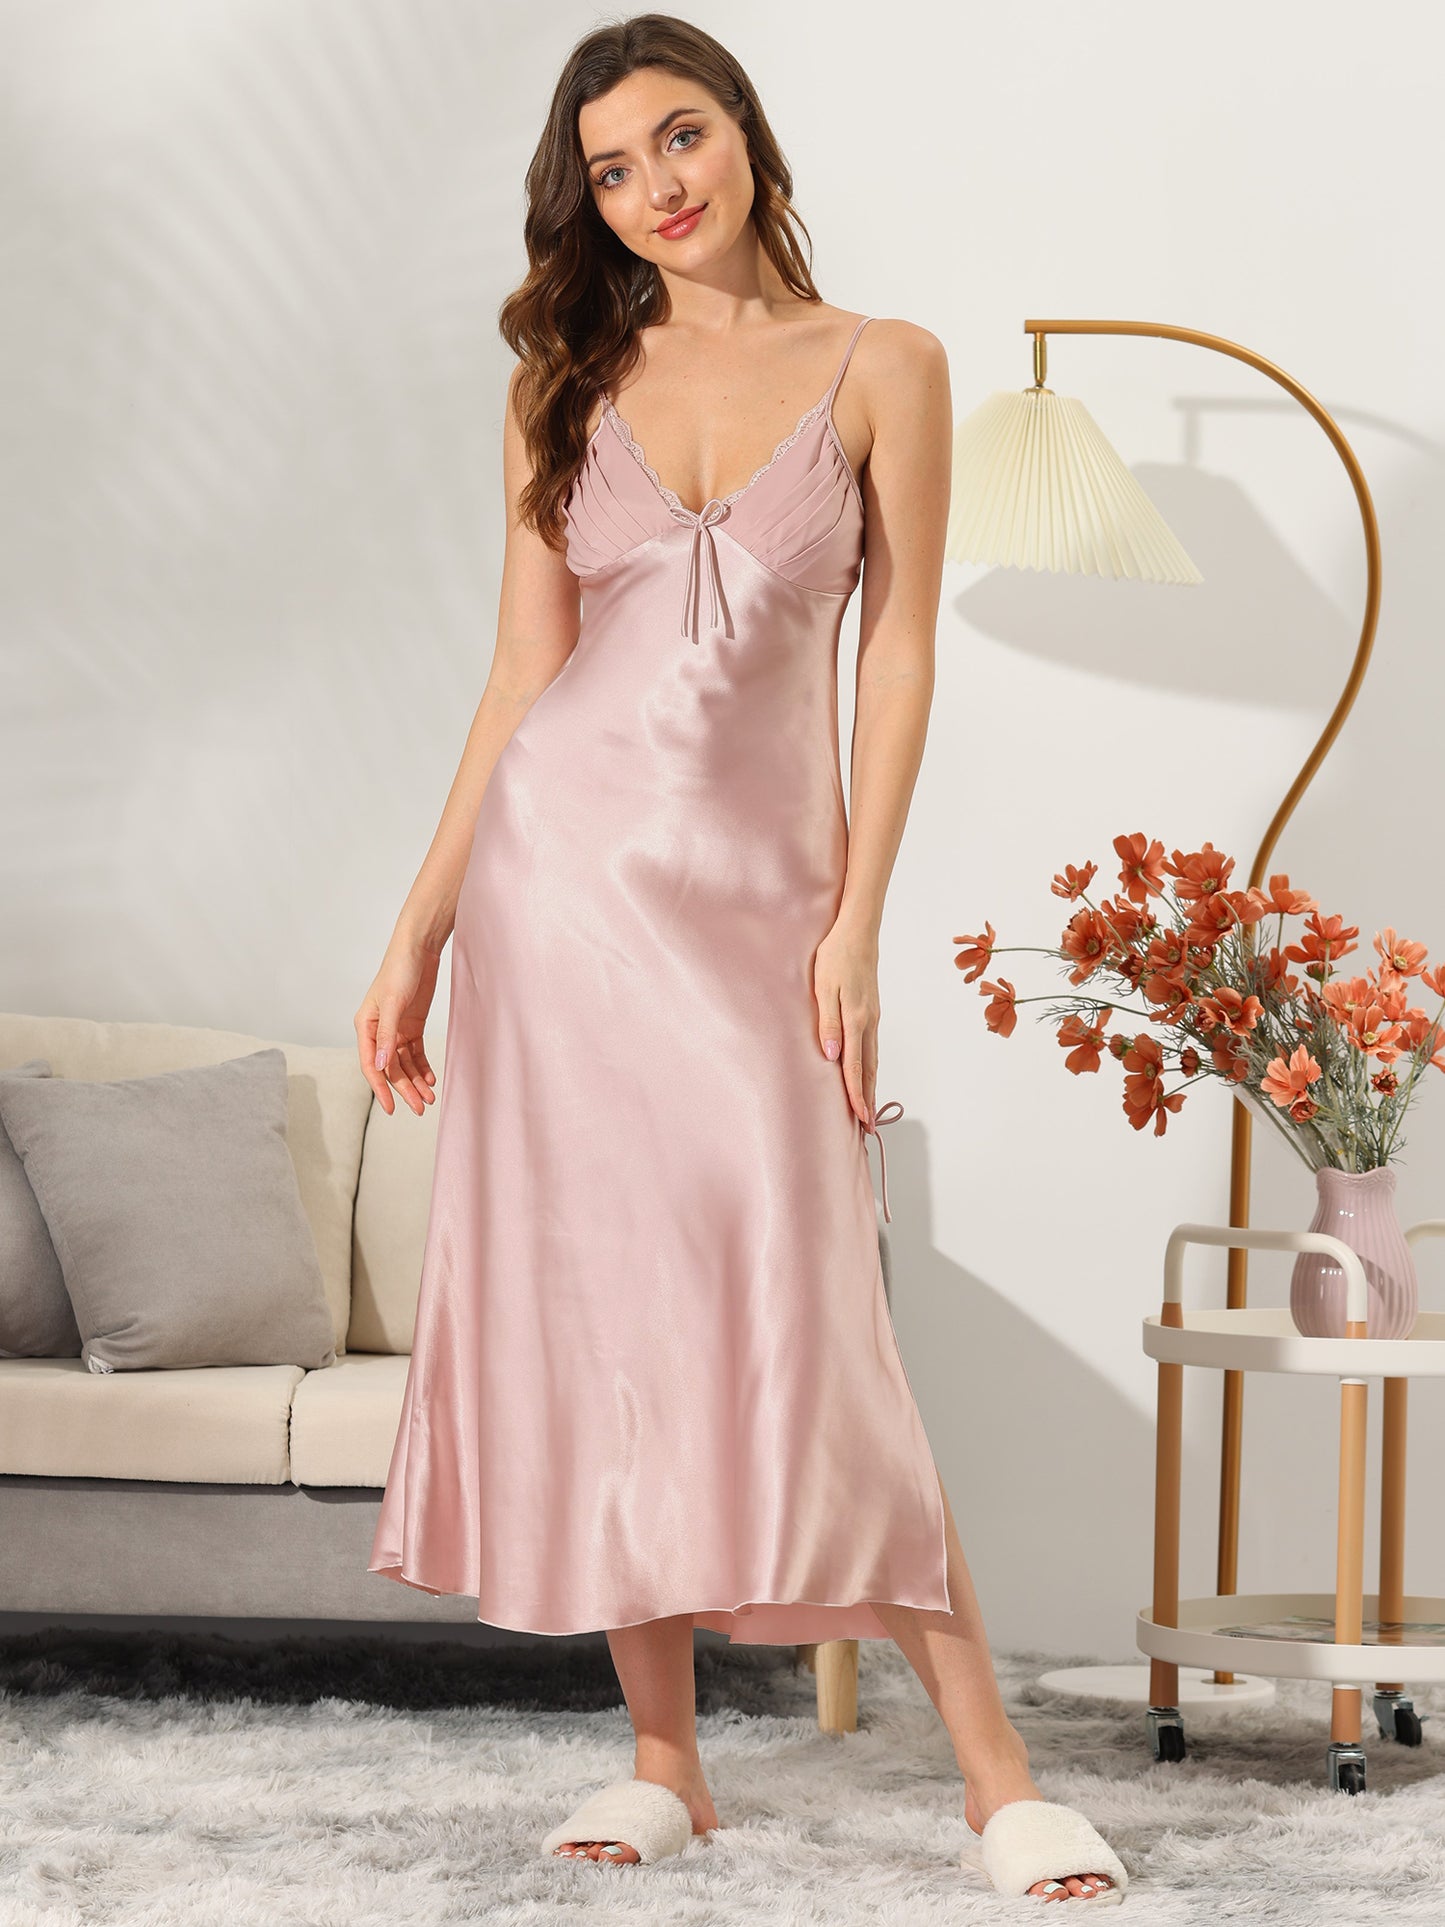 cheibear Satin Slip Dress Chemise Silky Lounge Camisole Maxi Nightgowns Light Pink